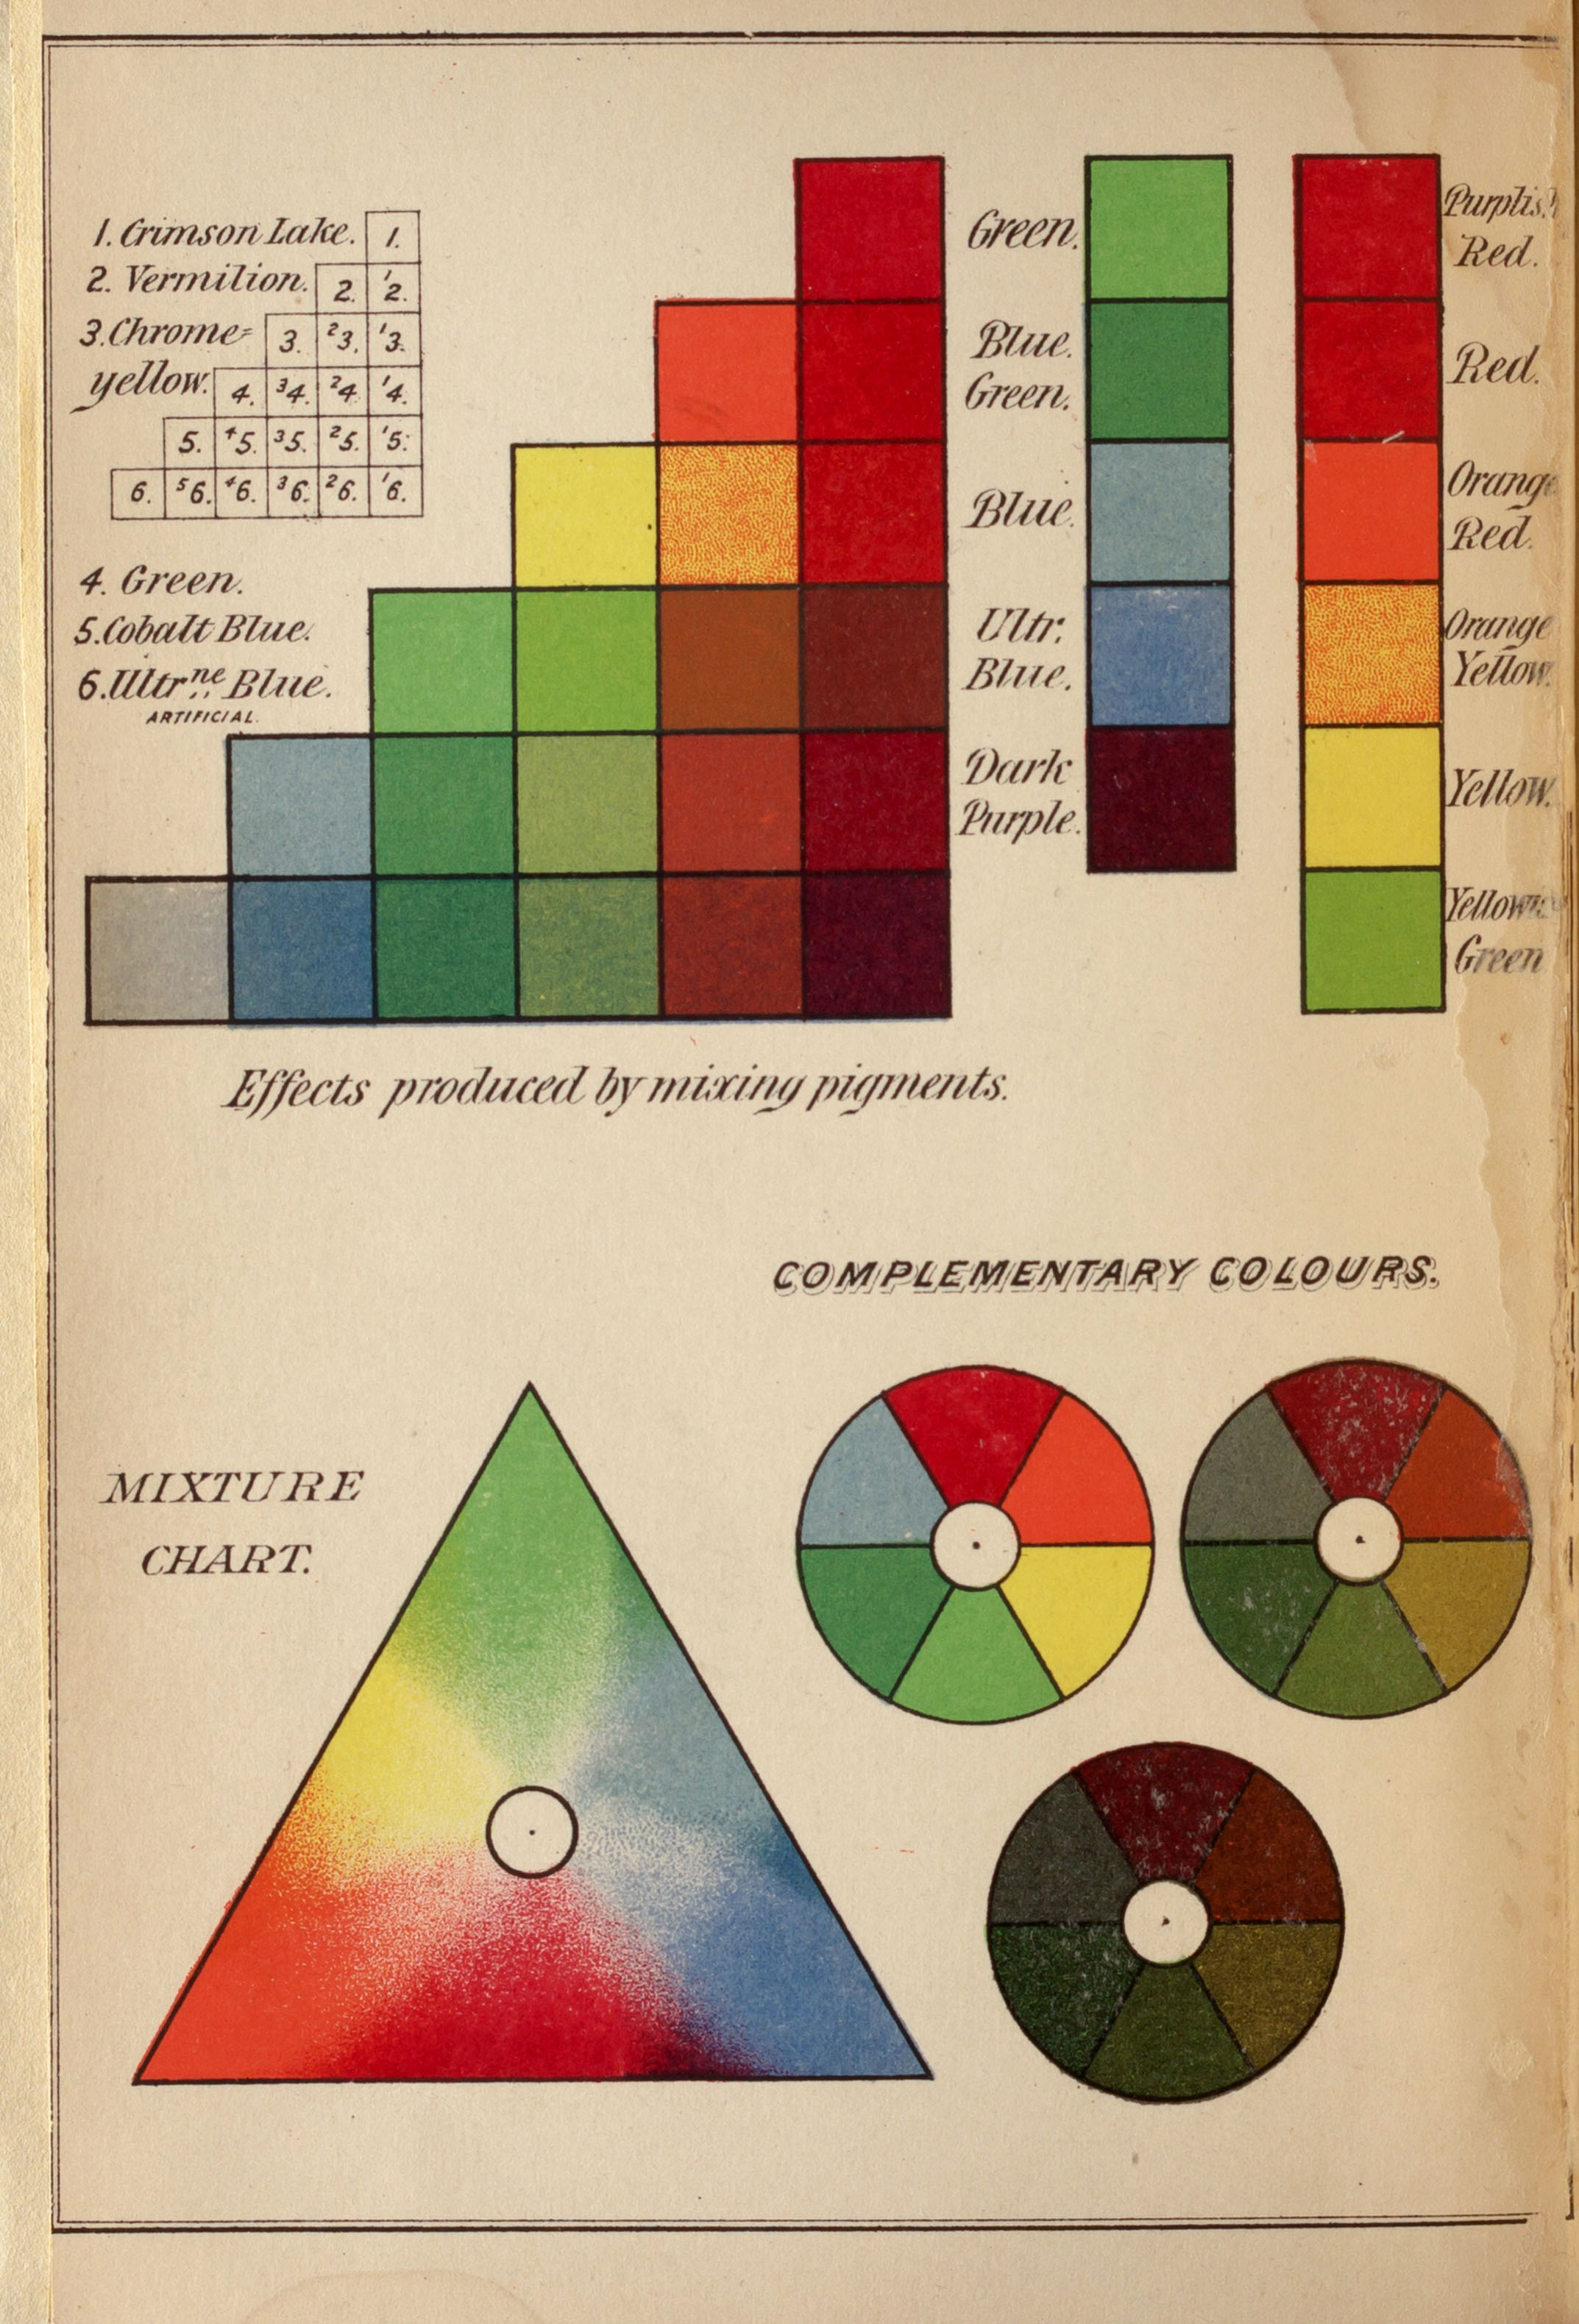 Vintage Color Wheel Scale Of Normal Colors And Their Hues Print Poster